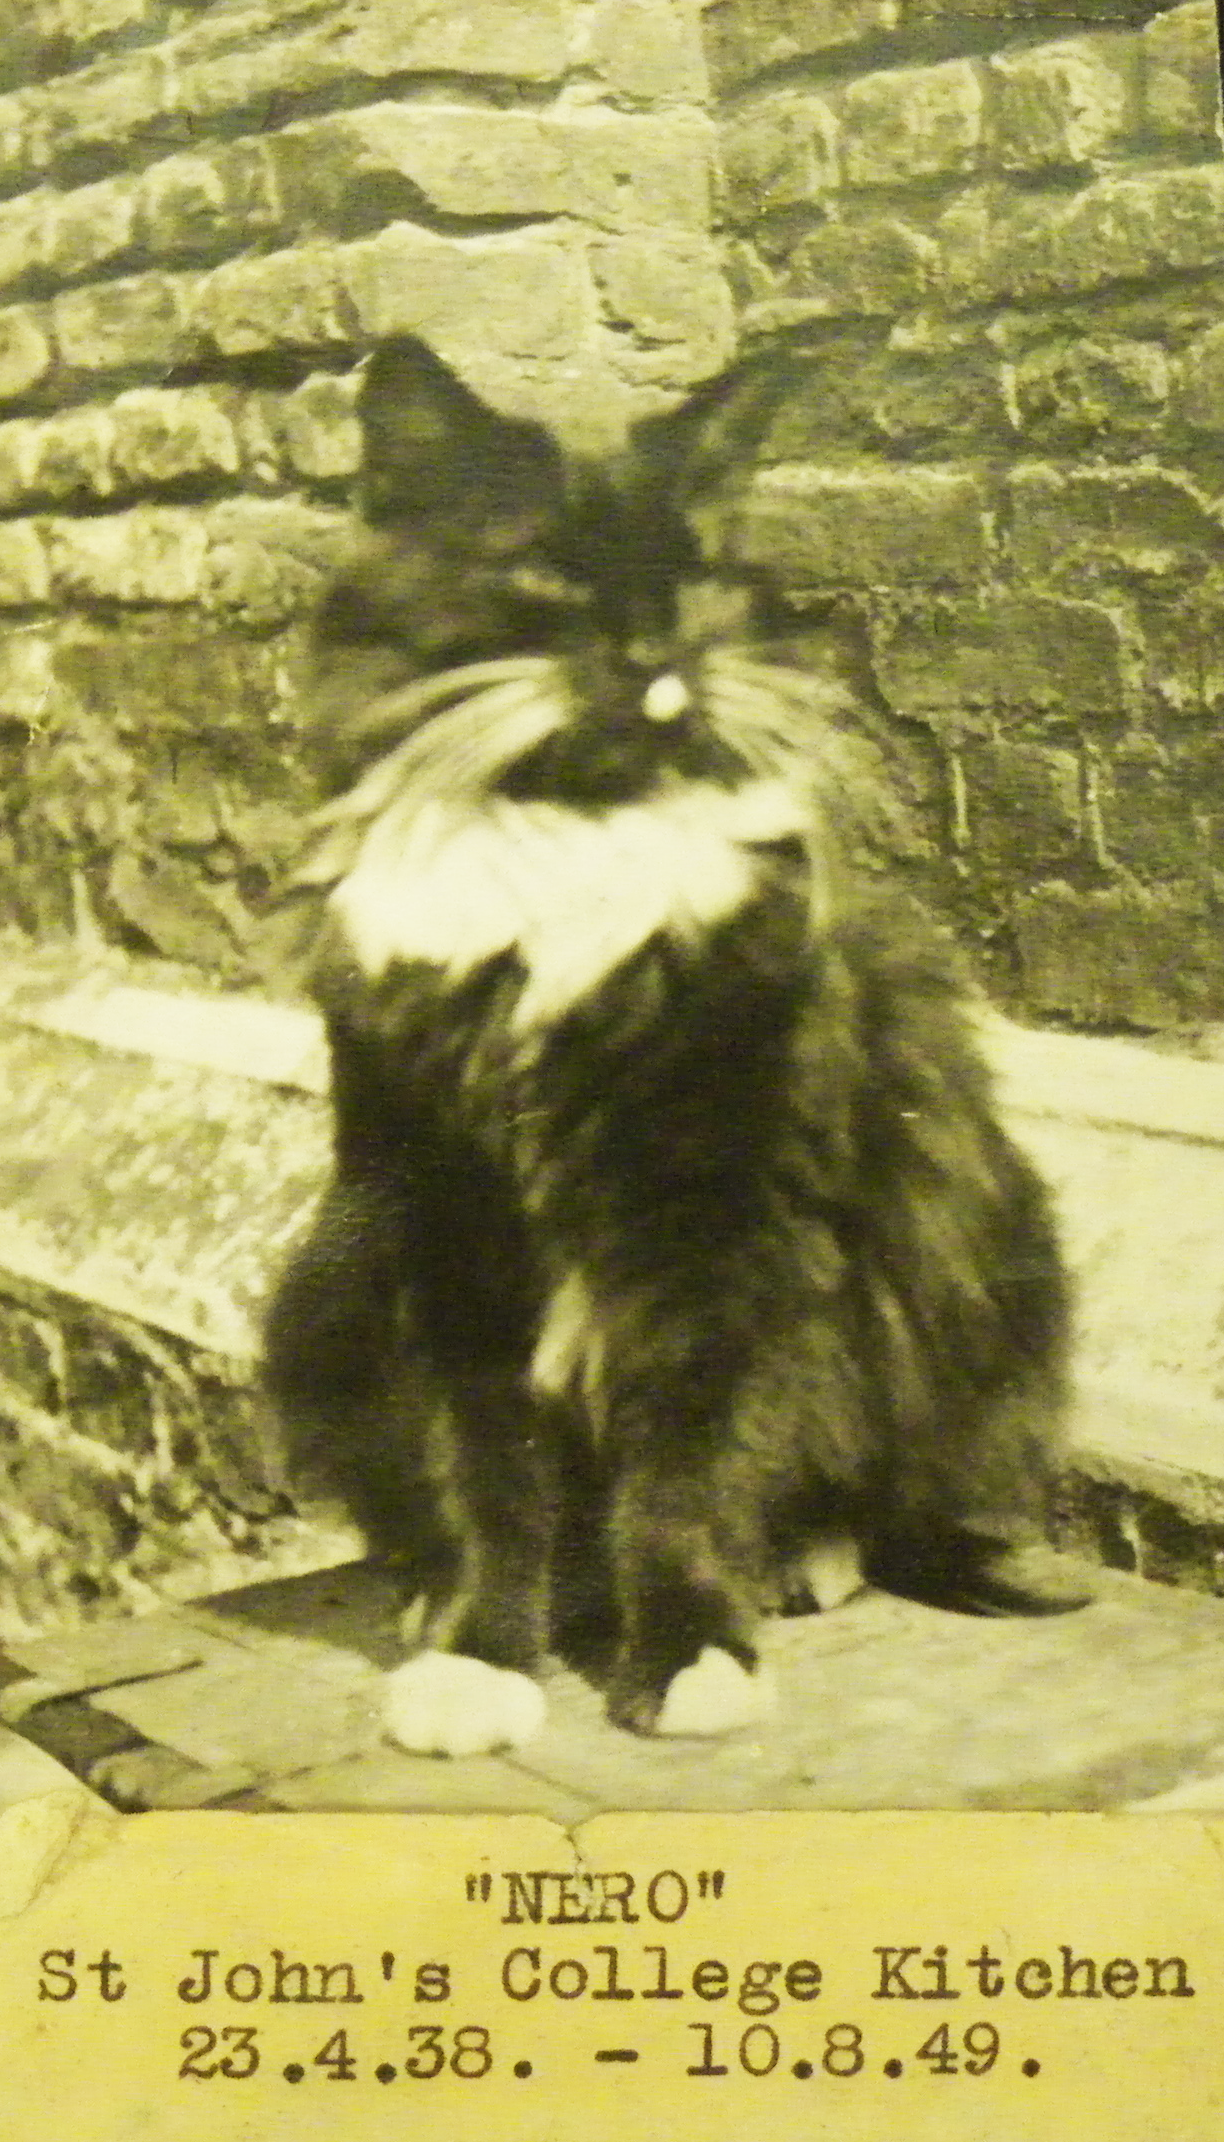 Nero, 1938 to 1949. A black and white photograph of a black and white cat.